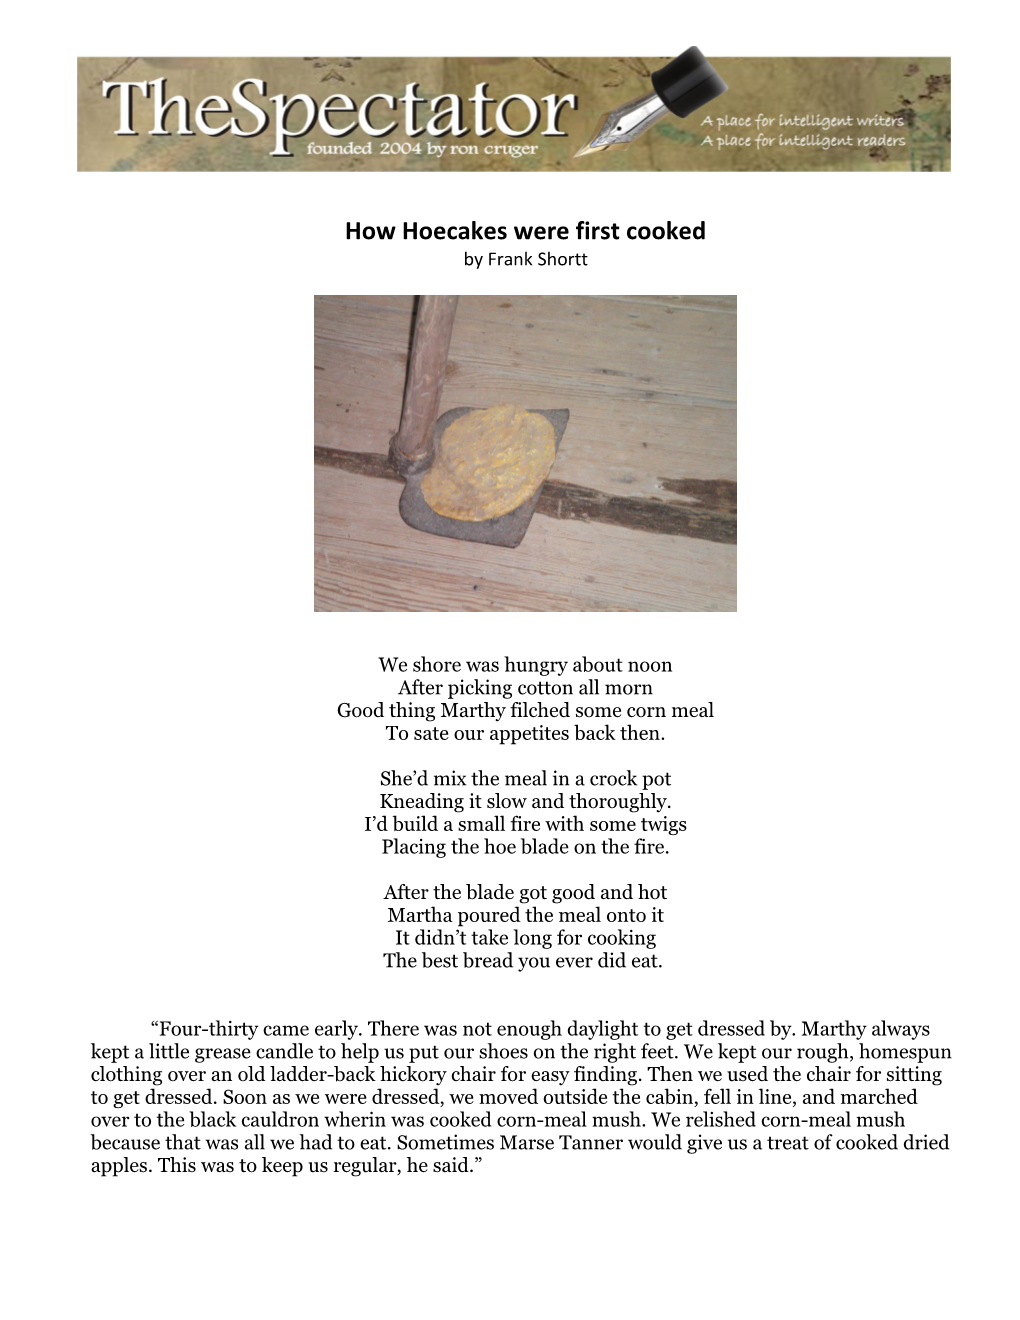 How Hoecakes Were First Cooked by Frank Shortt